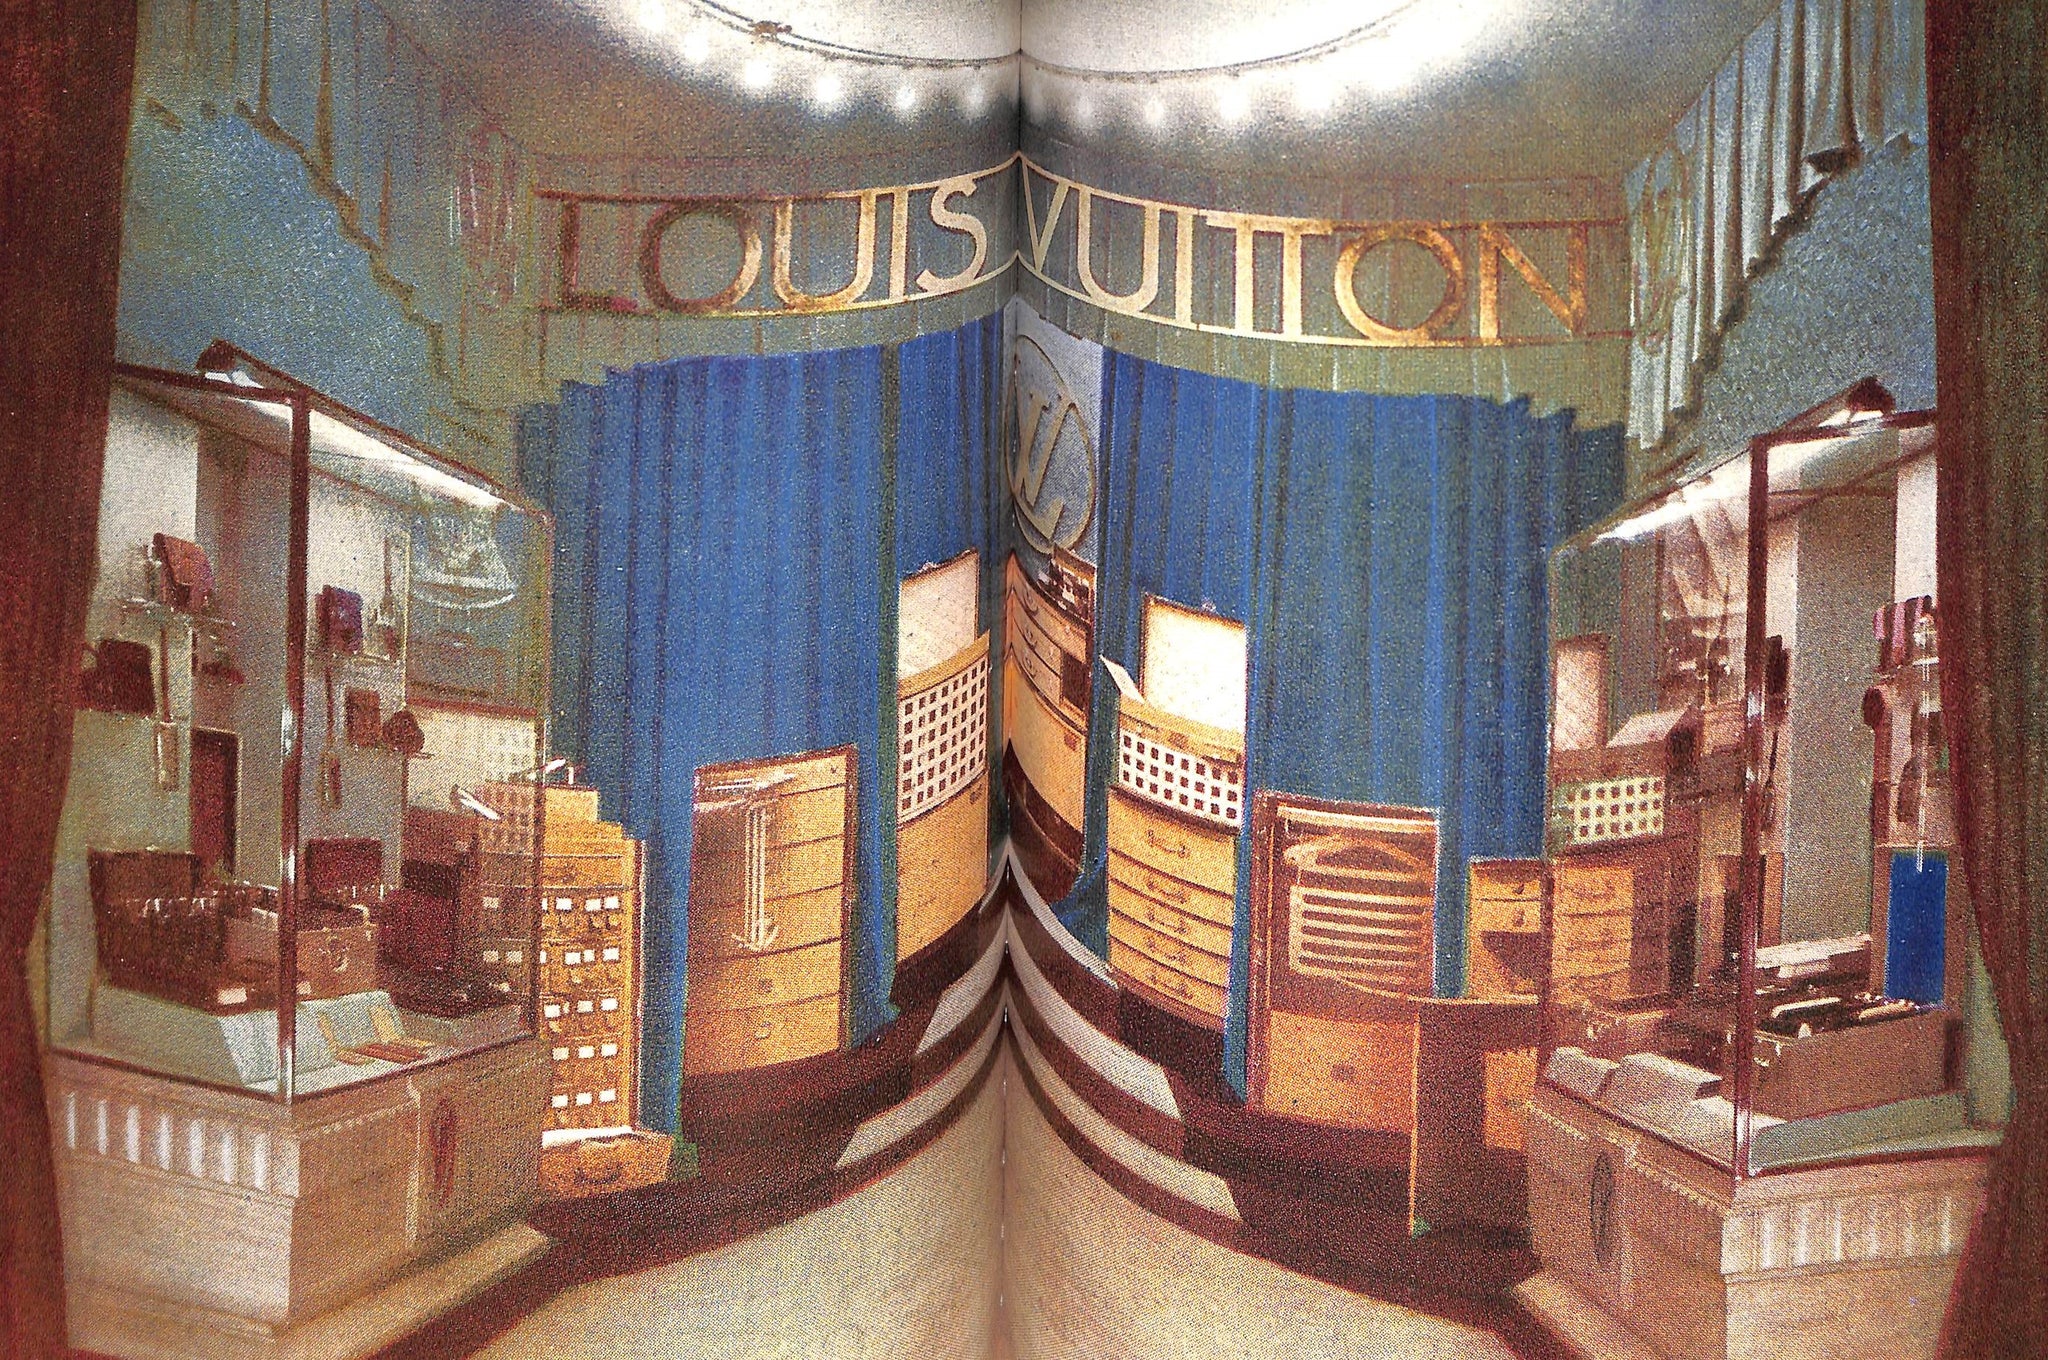 Louis+Vuitton+%3A+The+Birth+of+Modern+Luxury+by+Paul-Gerard+Pasols+%282005%2C+Hardcover%29  for sale online